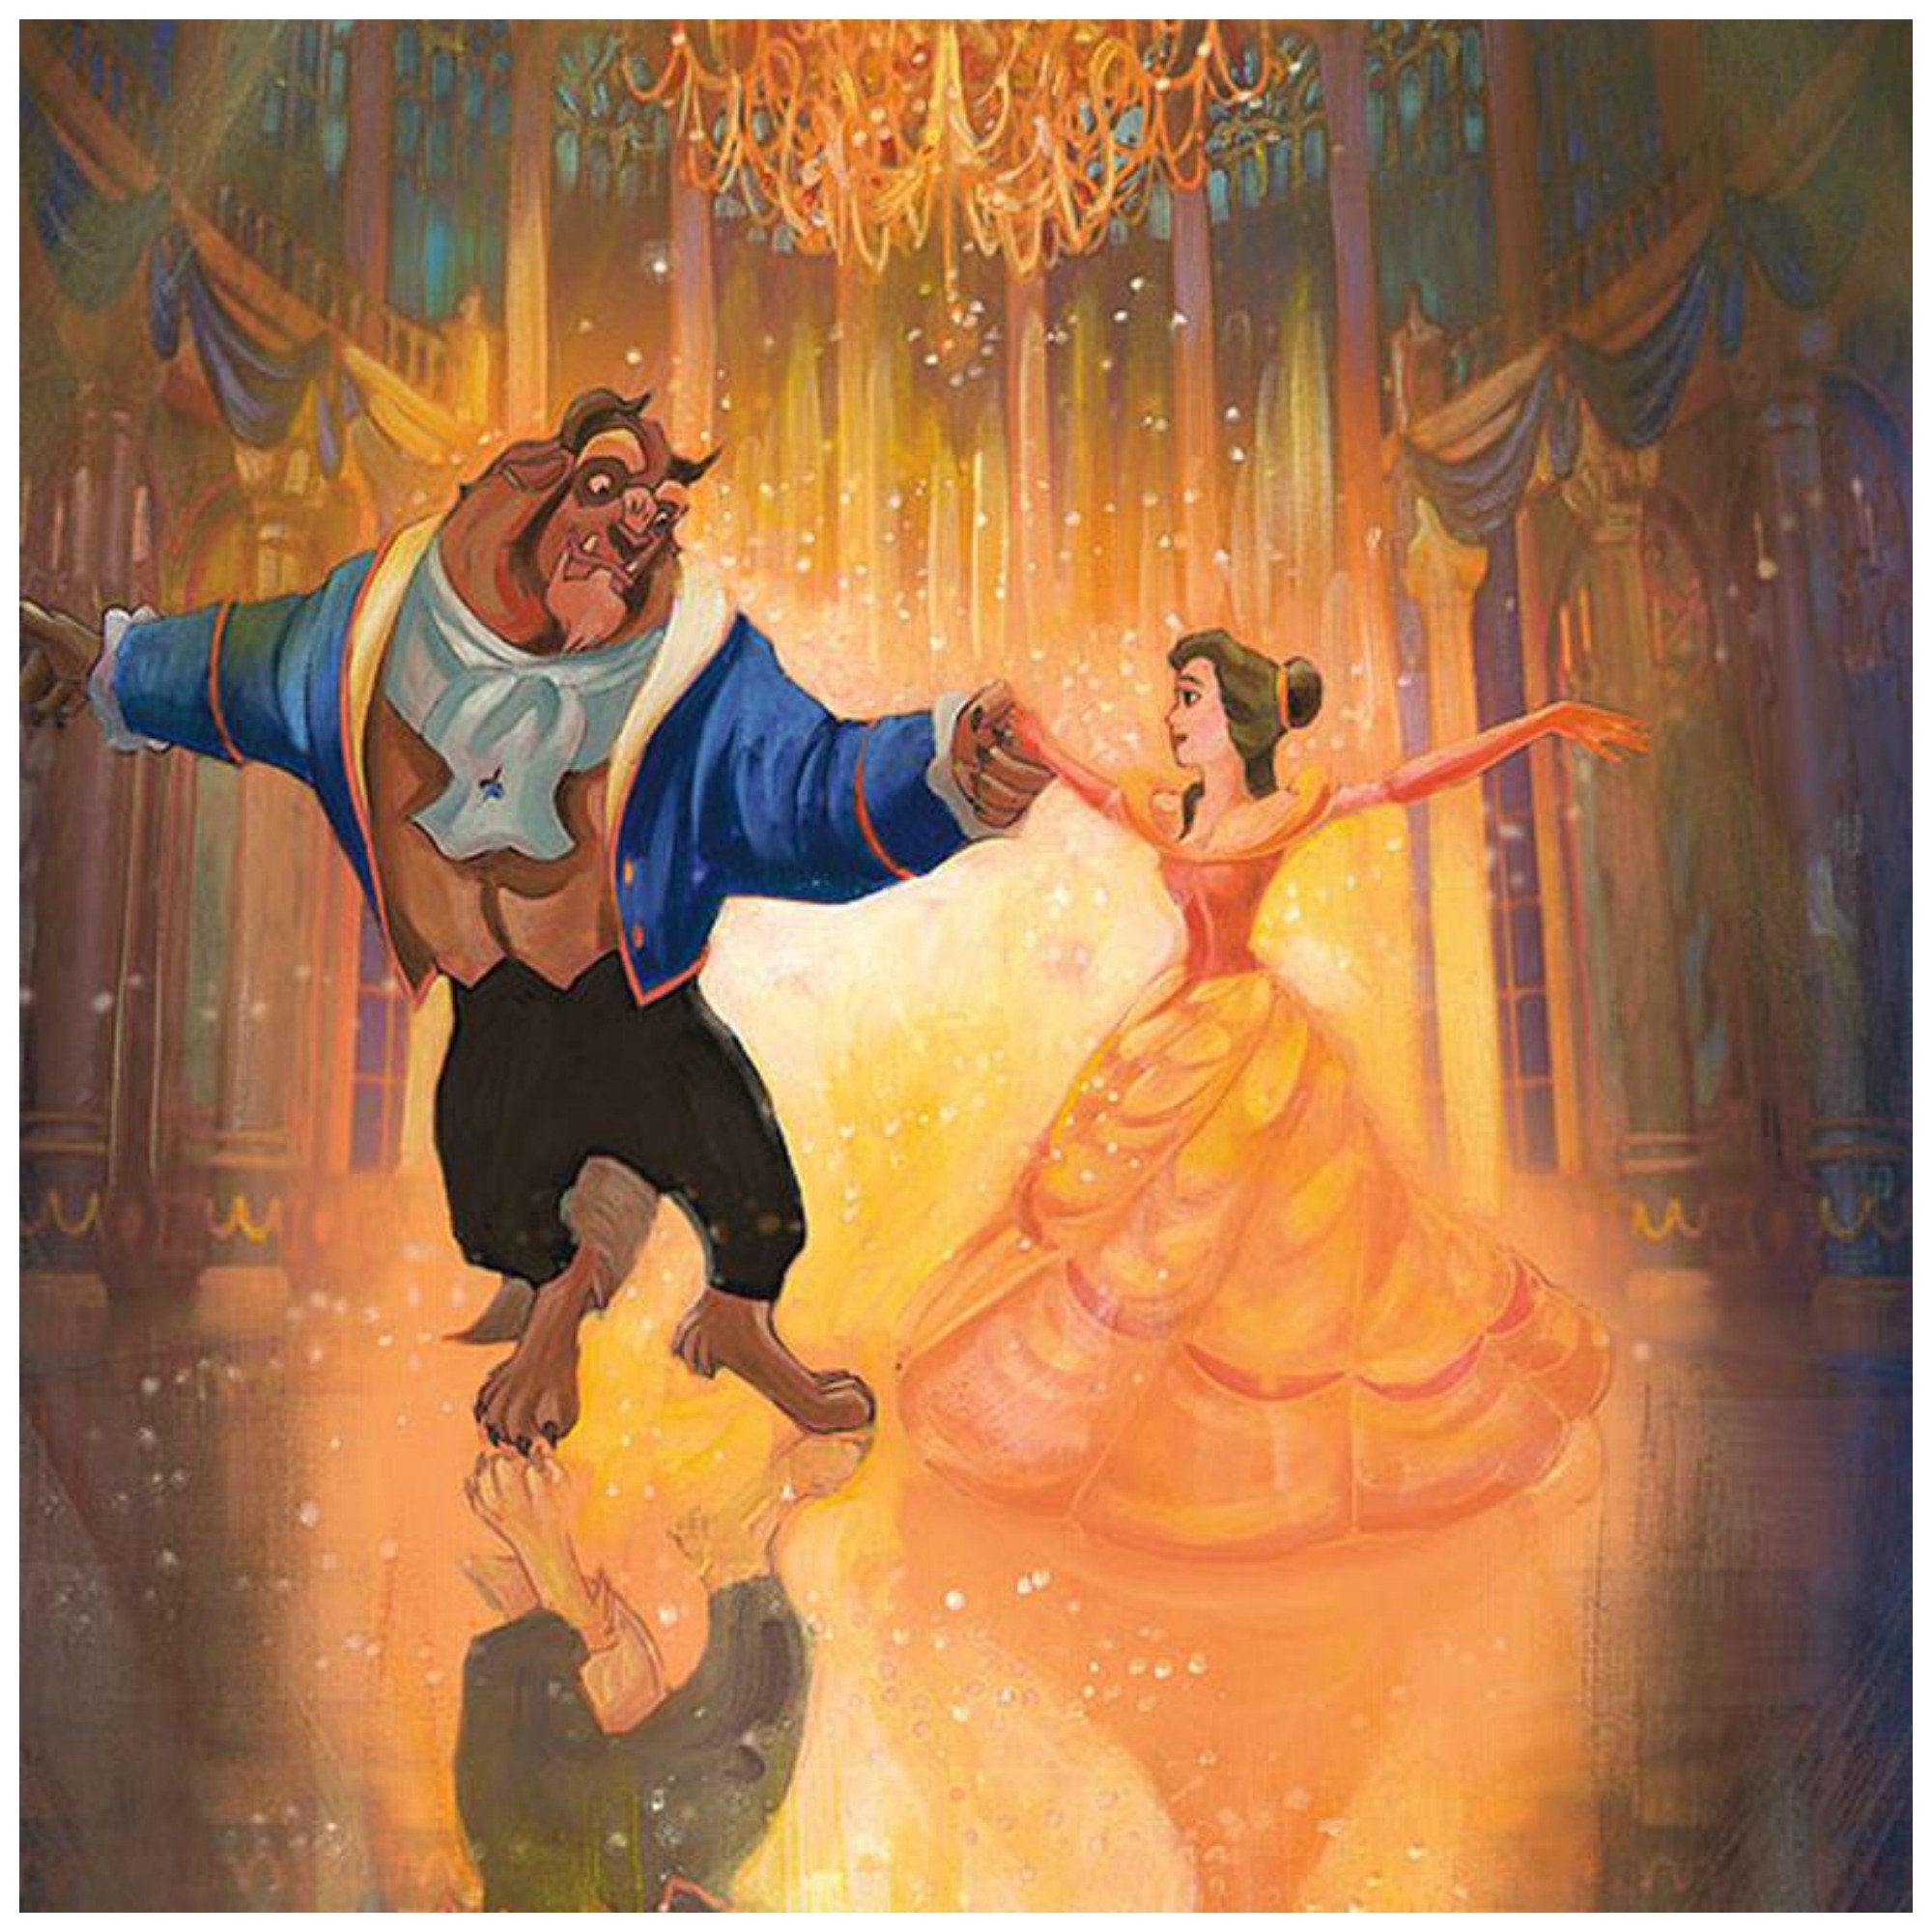 The Perfect Dance by John Rowe.  The magic of love surrounds Belle and the Beast, in their finest hour together - closeup.